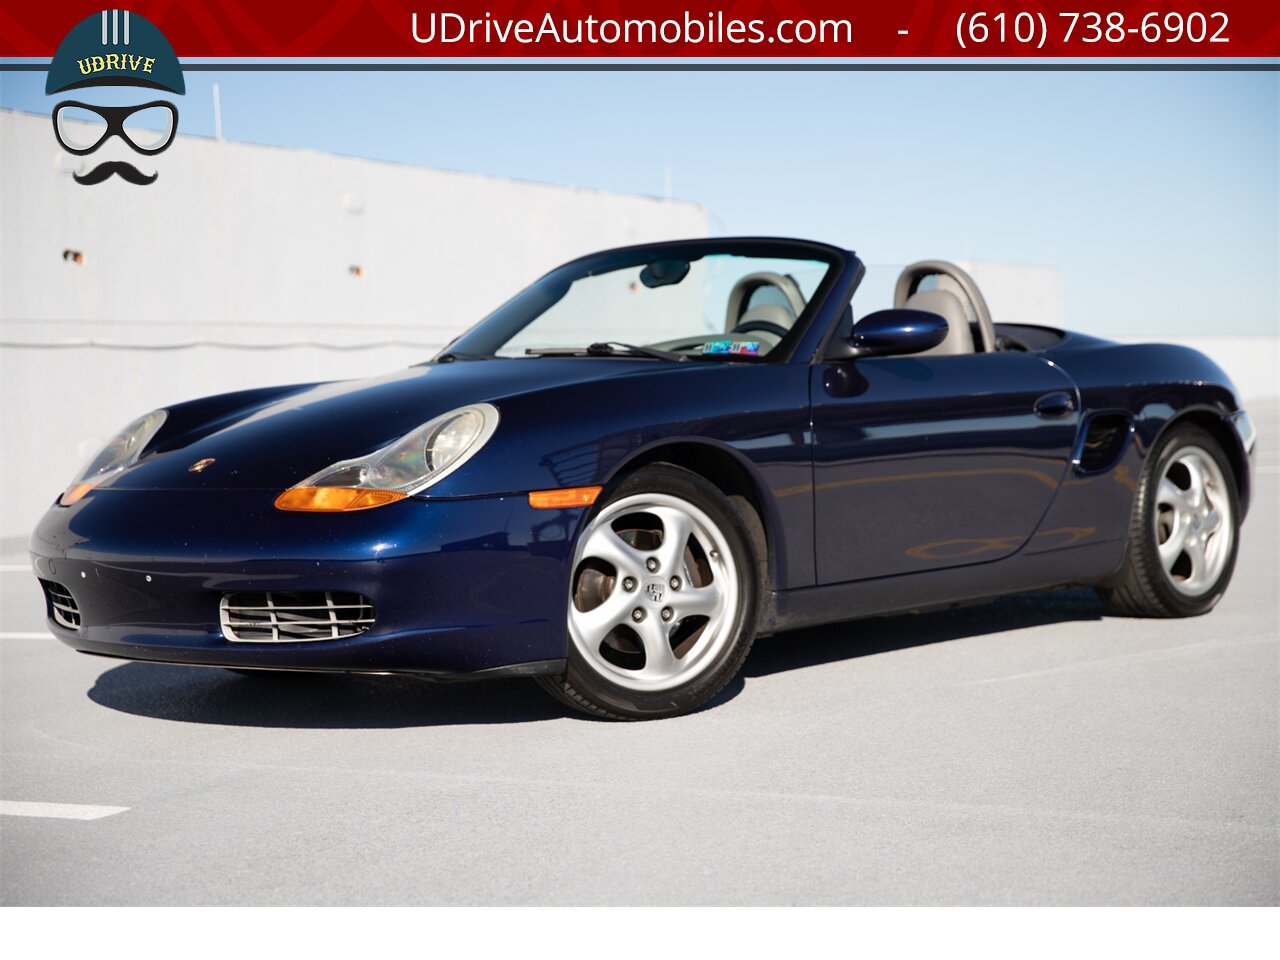 2001 Porsche Boxster 5 Speed Manual Detailed Service History  Same Owner for Last 18 Years Hard Top Included - Photo 1 - West Chester, PA 19382